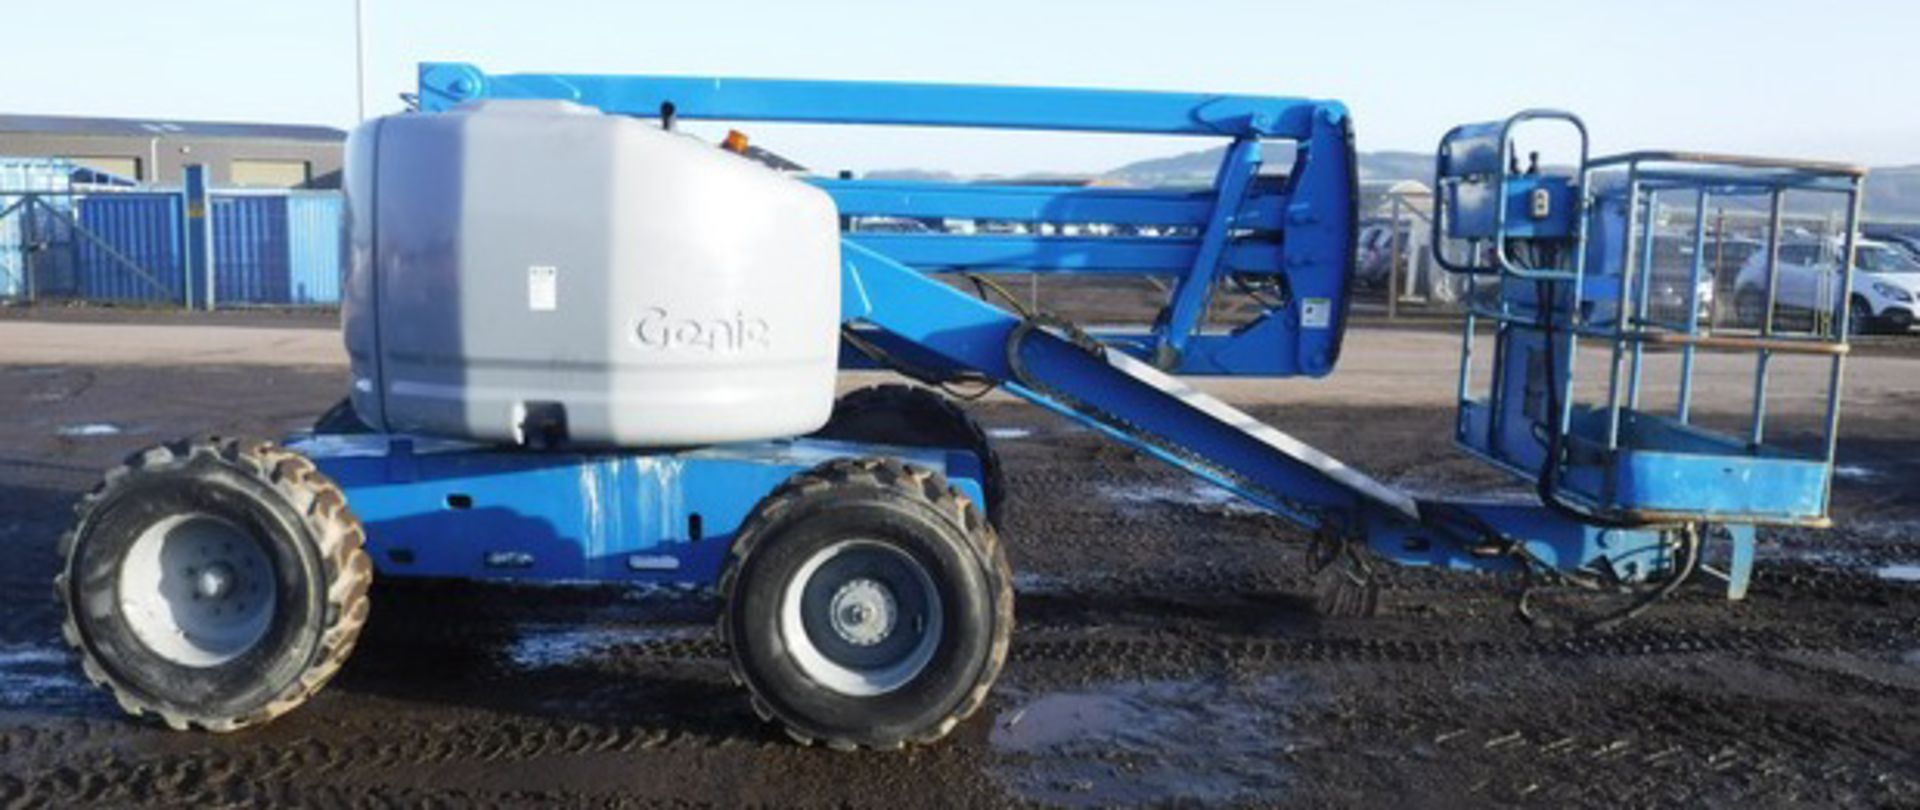 2000 GENIE MODEL Z45-25, S/N 15155, 8046HRS (NOT VERIFIED), LIFT CAPACITY - 230 - Image 13 of 17